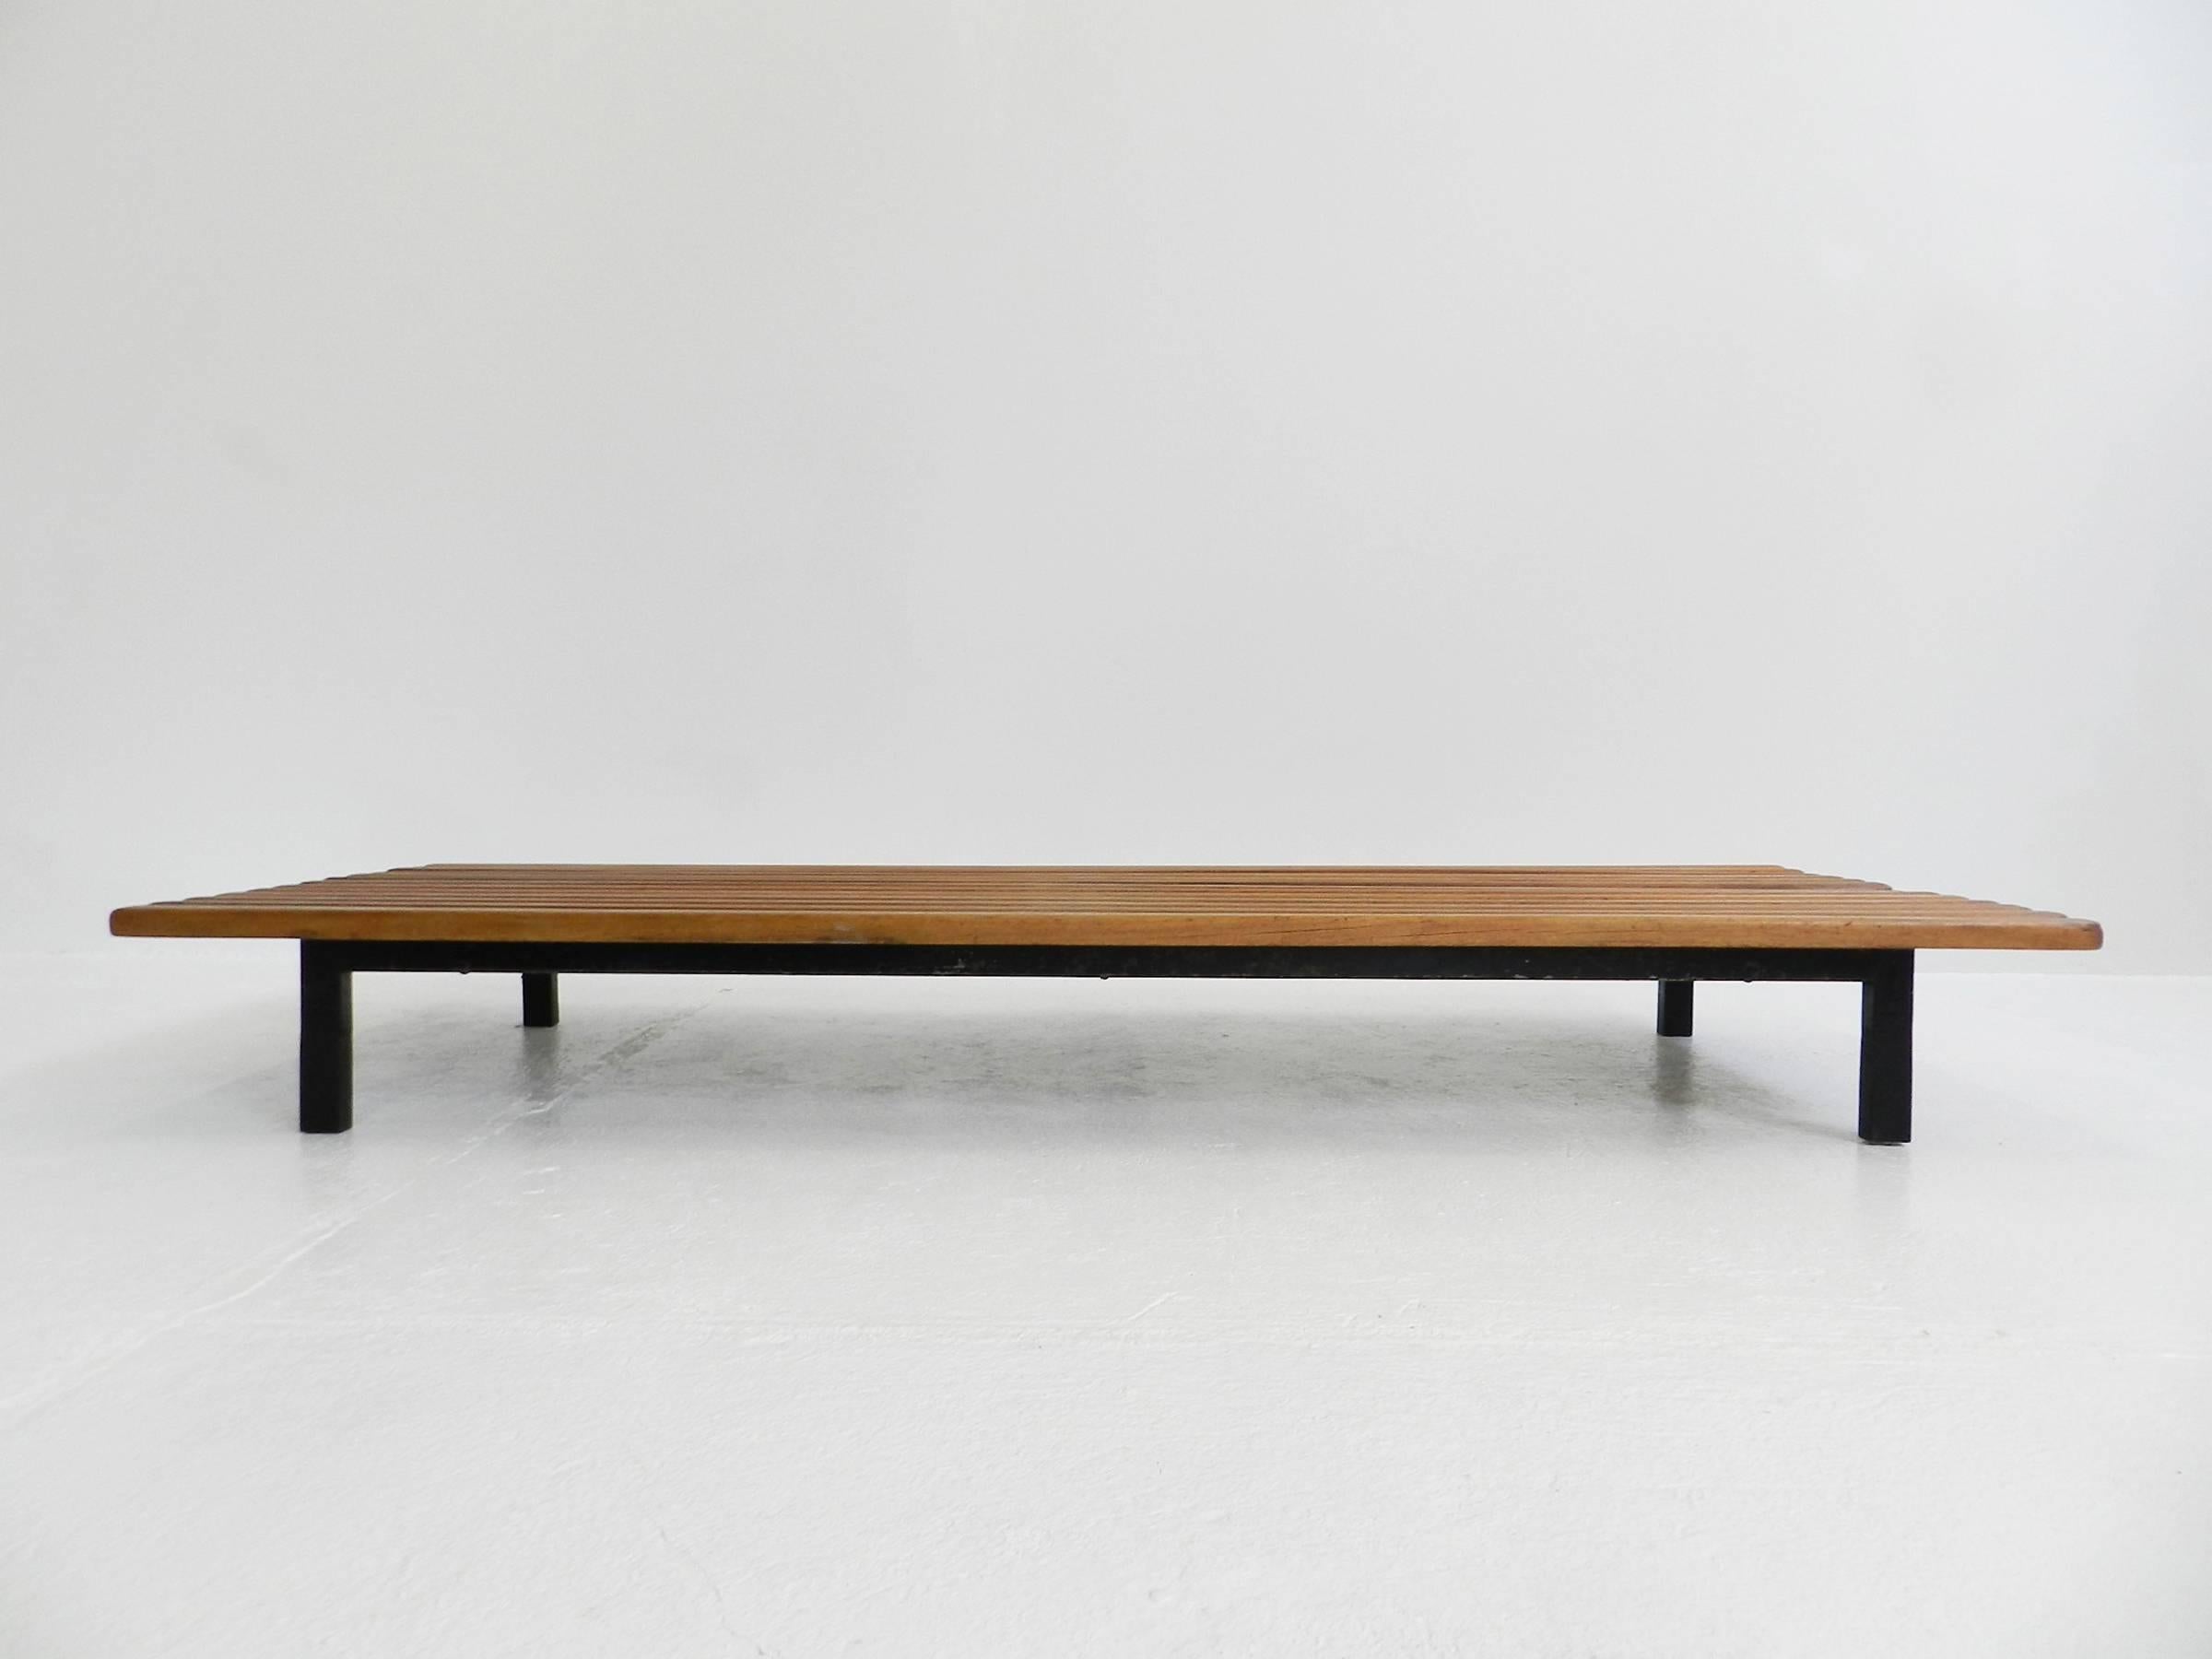 A mahogany slat bench from Cité Cansado in Mauritania.

Manufactured by Steph Simon (France), circa 1950.
Wood, lacquered metal frame and legs.

Provenance: Cansado, Mauritania (Africa).